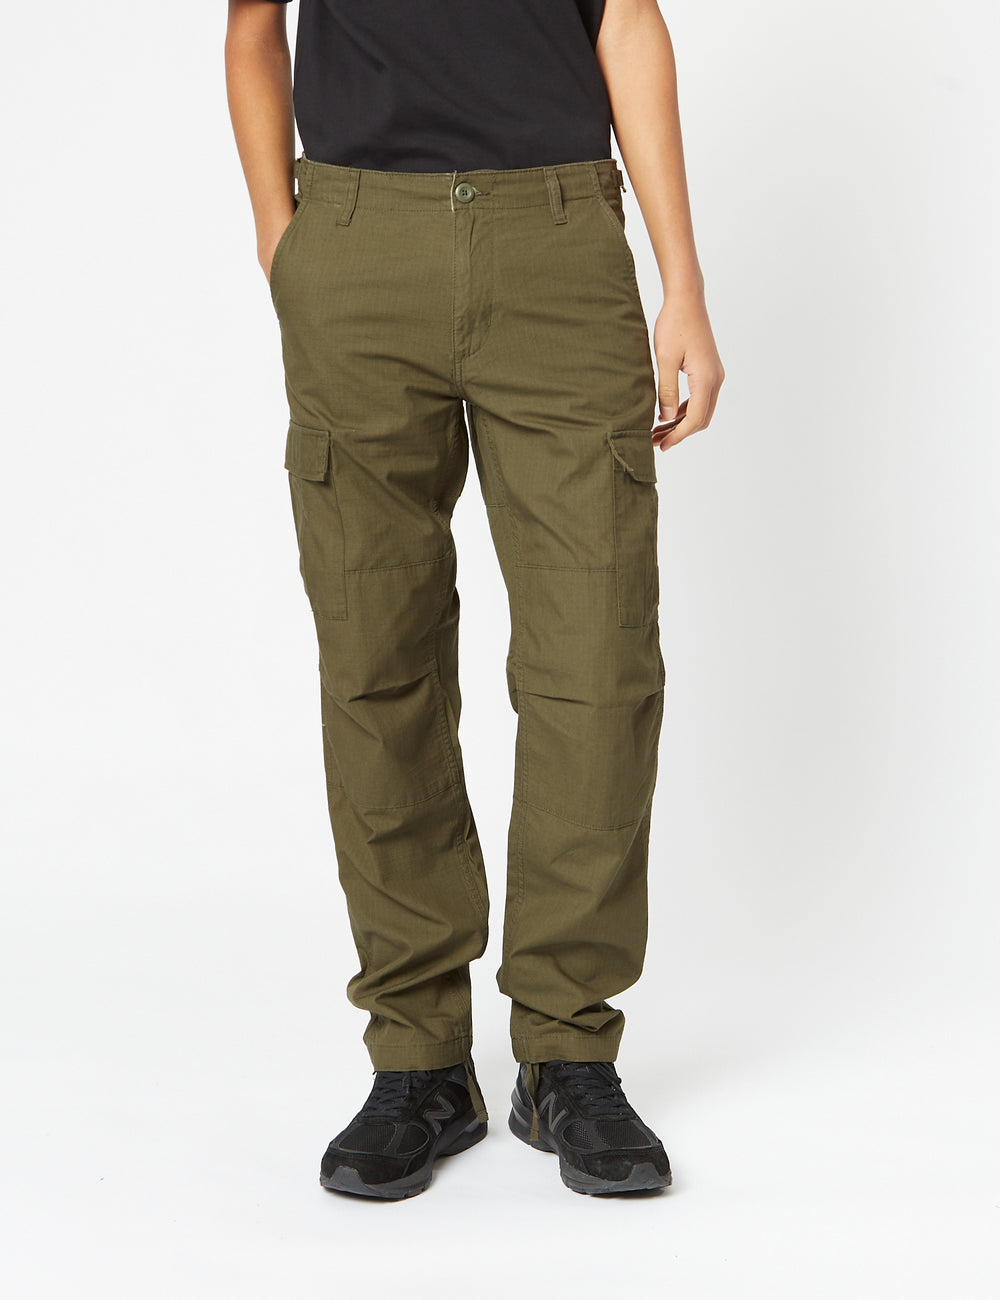 Carhartt-WIP Womens Collins Pant - Cypress Green Rinsed – URBAN EXCESS